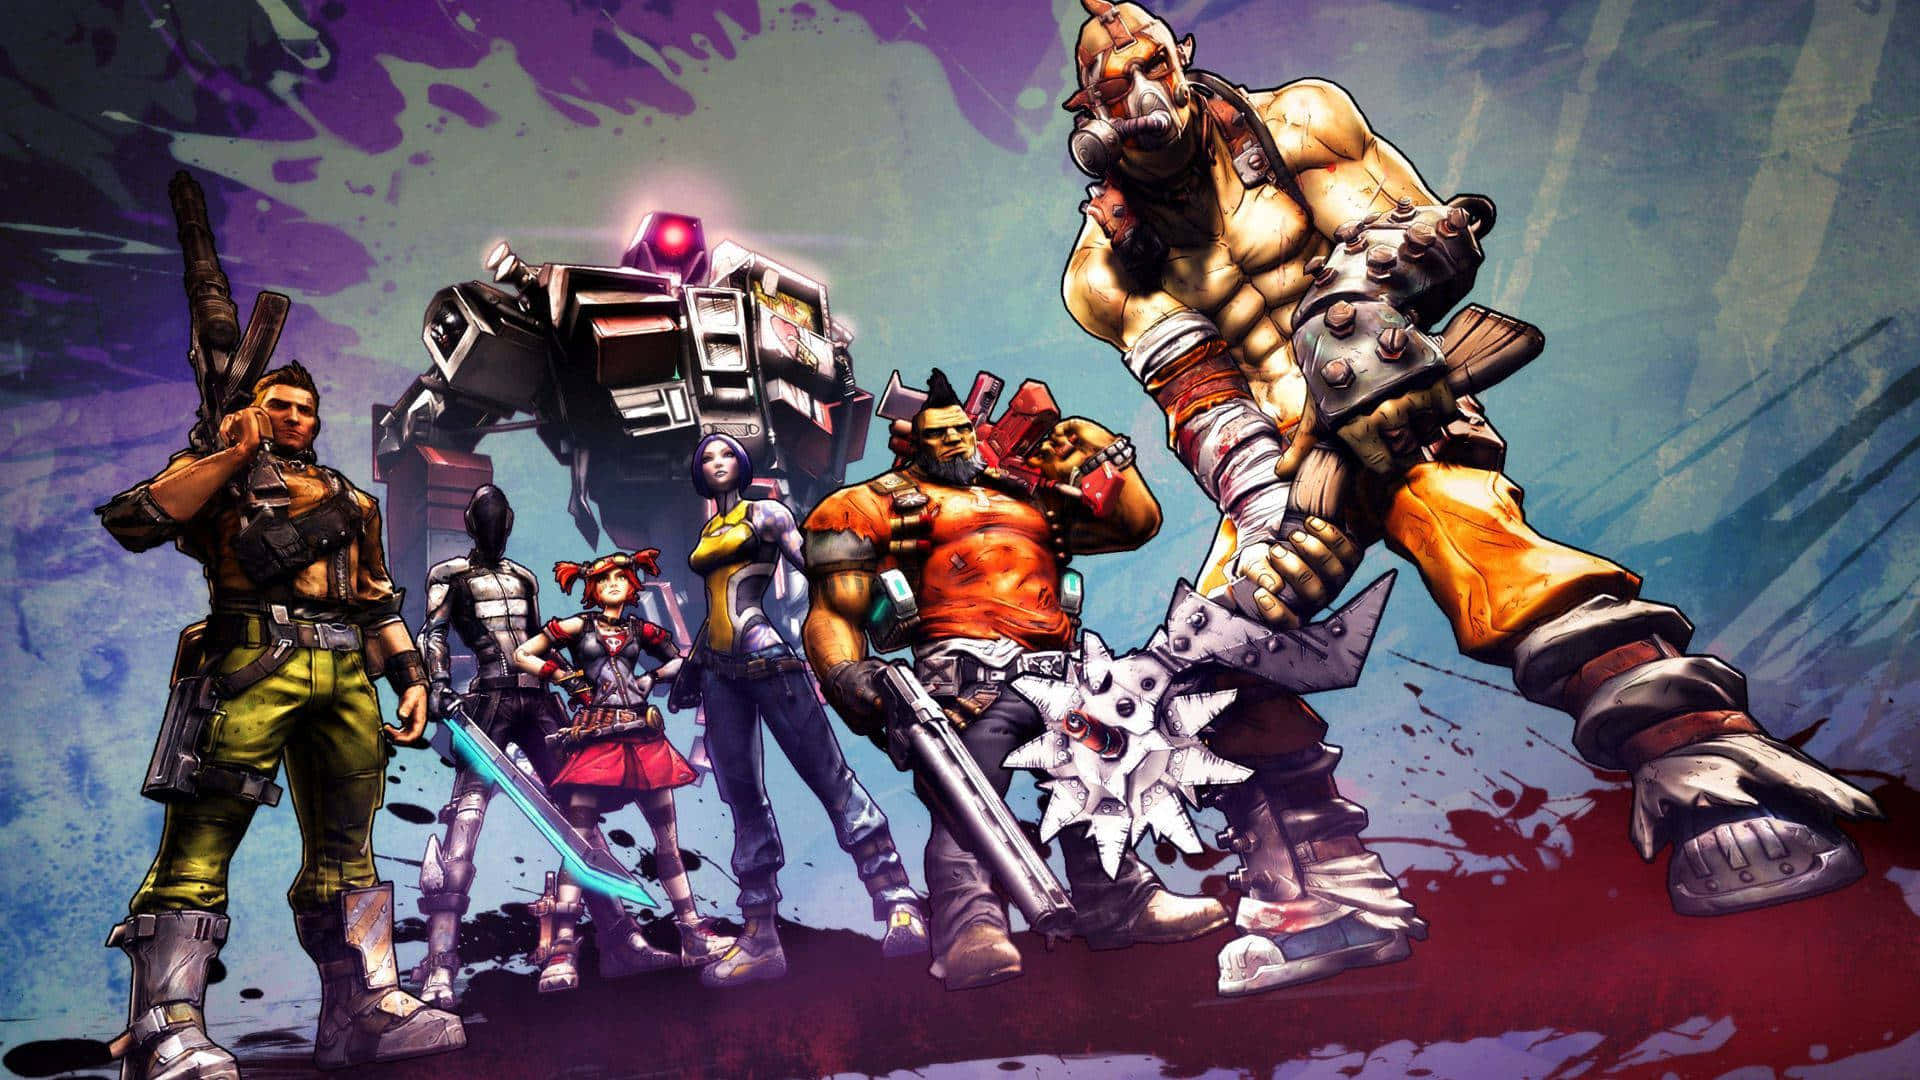 Exciting action-packed poster of Borderlands characters